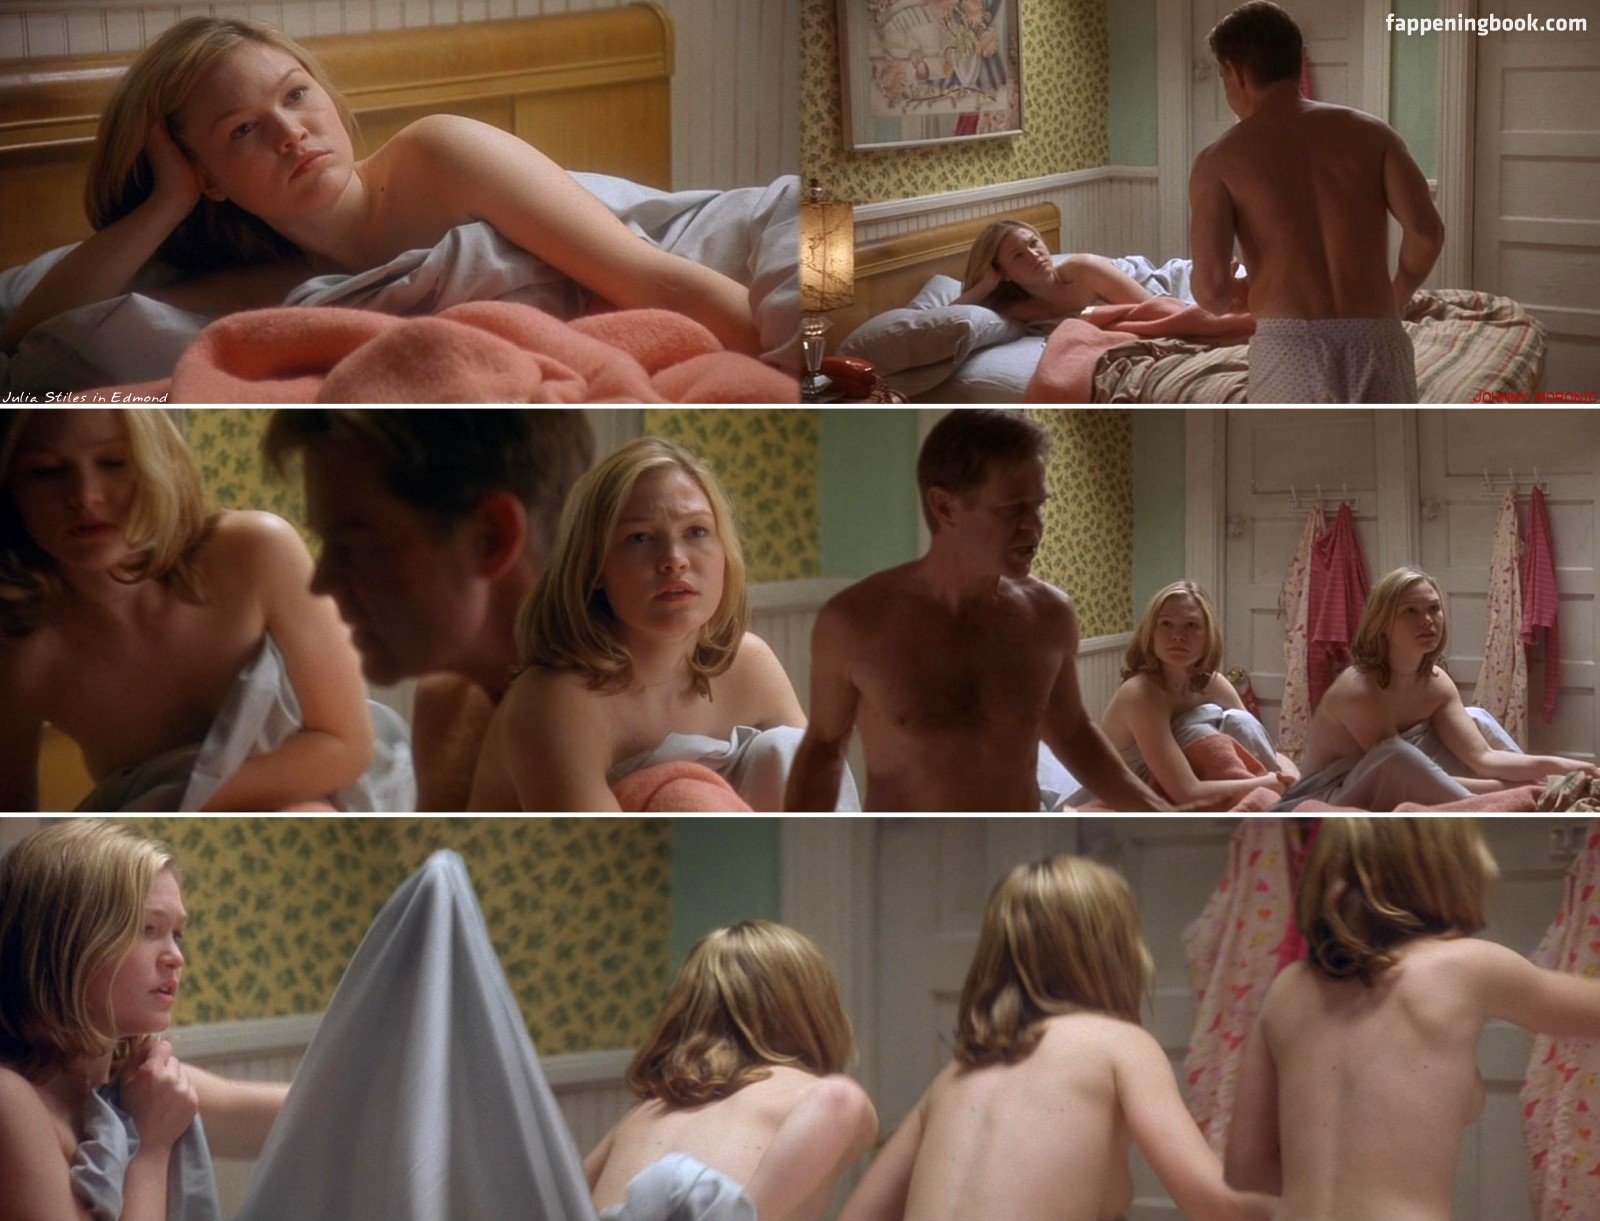 Julia Stiles Nude, The Fappening - Photo #272525 - FappeningBook.